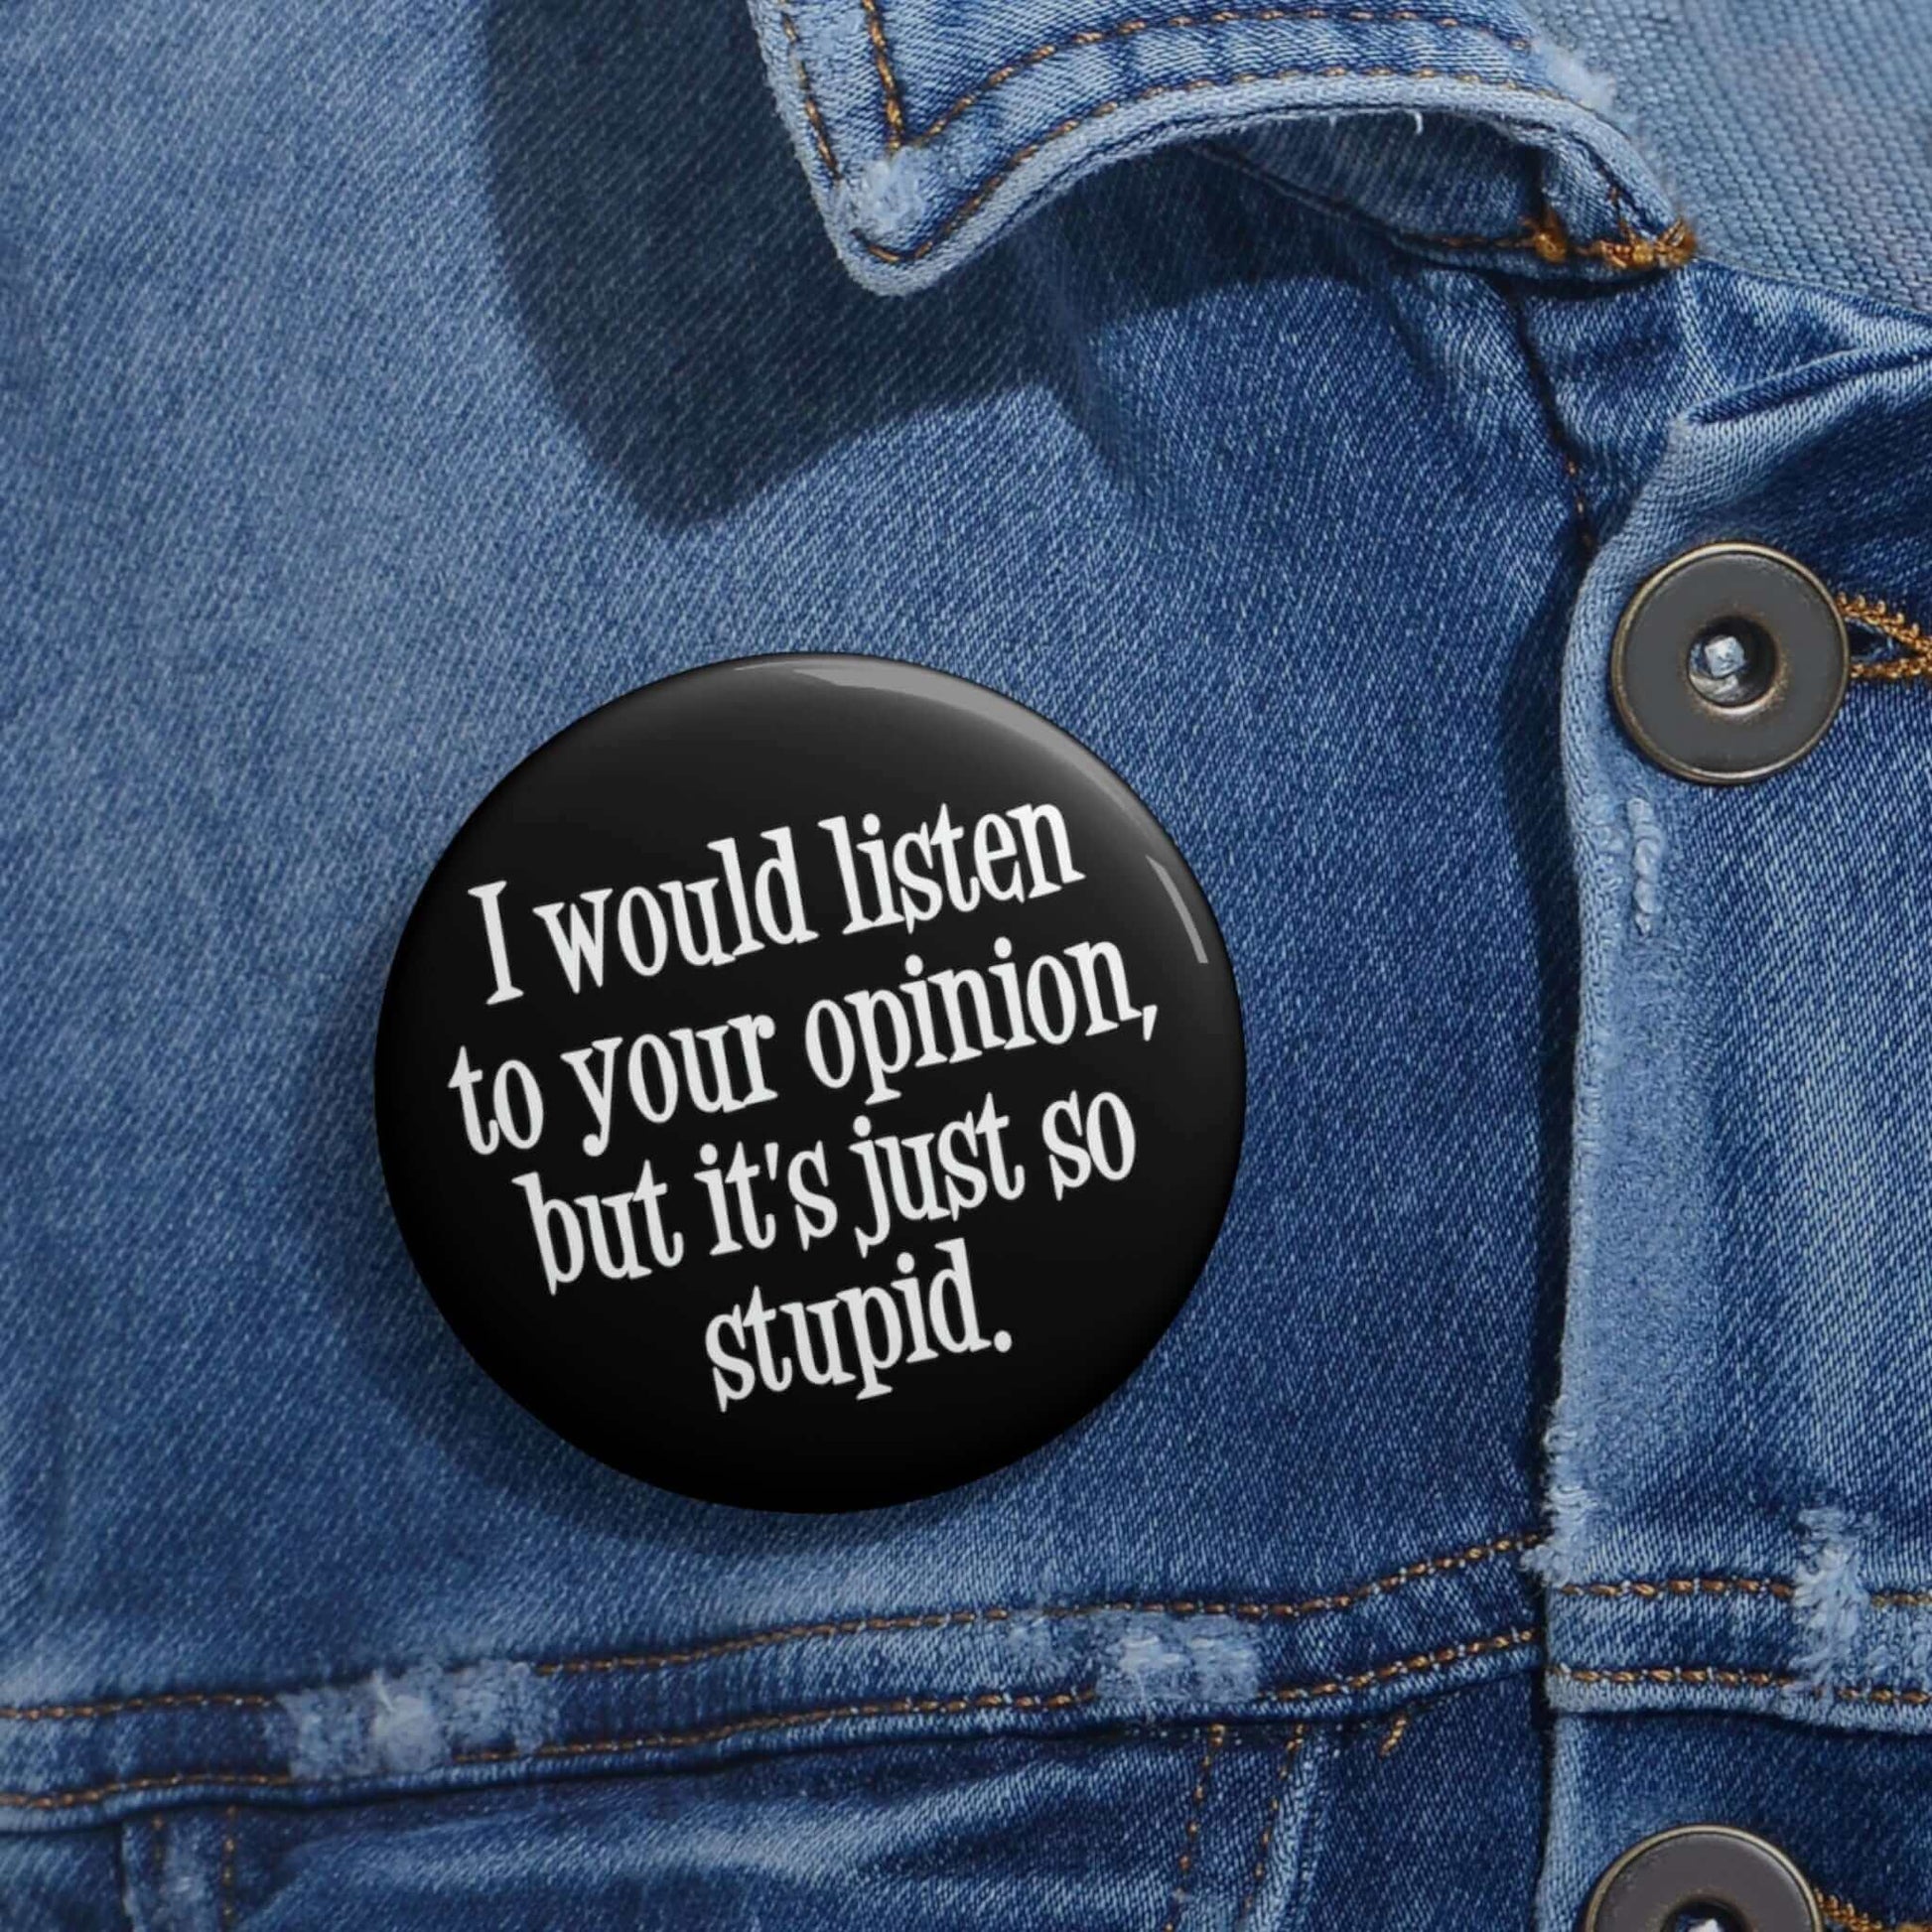 Black pinback button that says I would listen to your opinion but it's just so stupid.